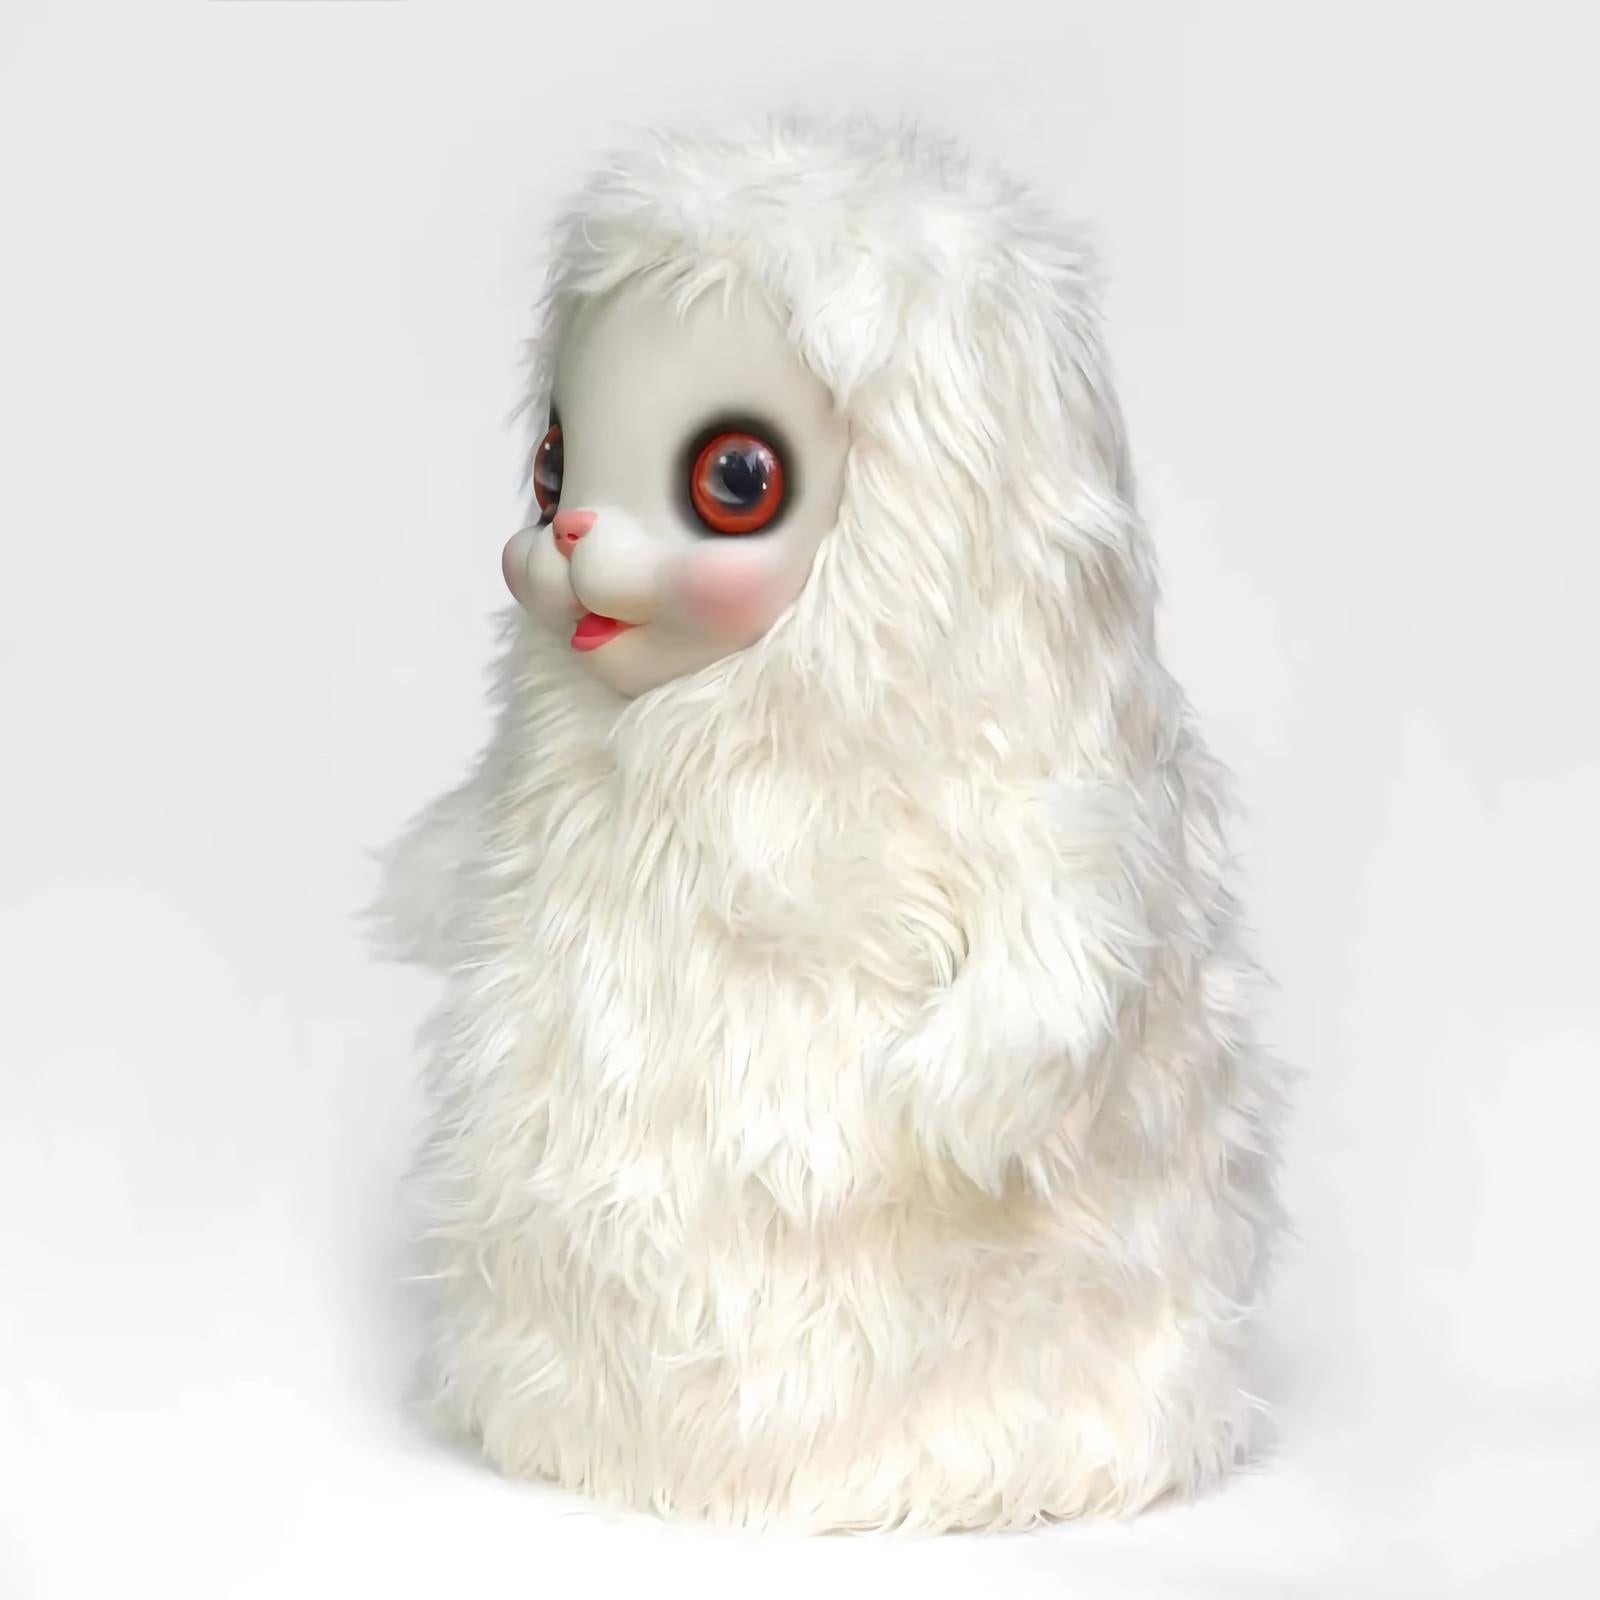 MARK RYDEN - YUKI THE YOUNG YAK (WHITE) Limited Surrealism Lowbrow Art Design - Sculpture by Mark Ryden